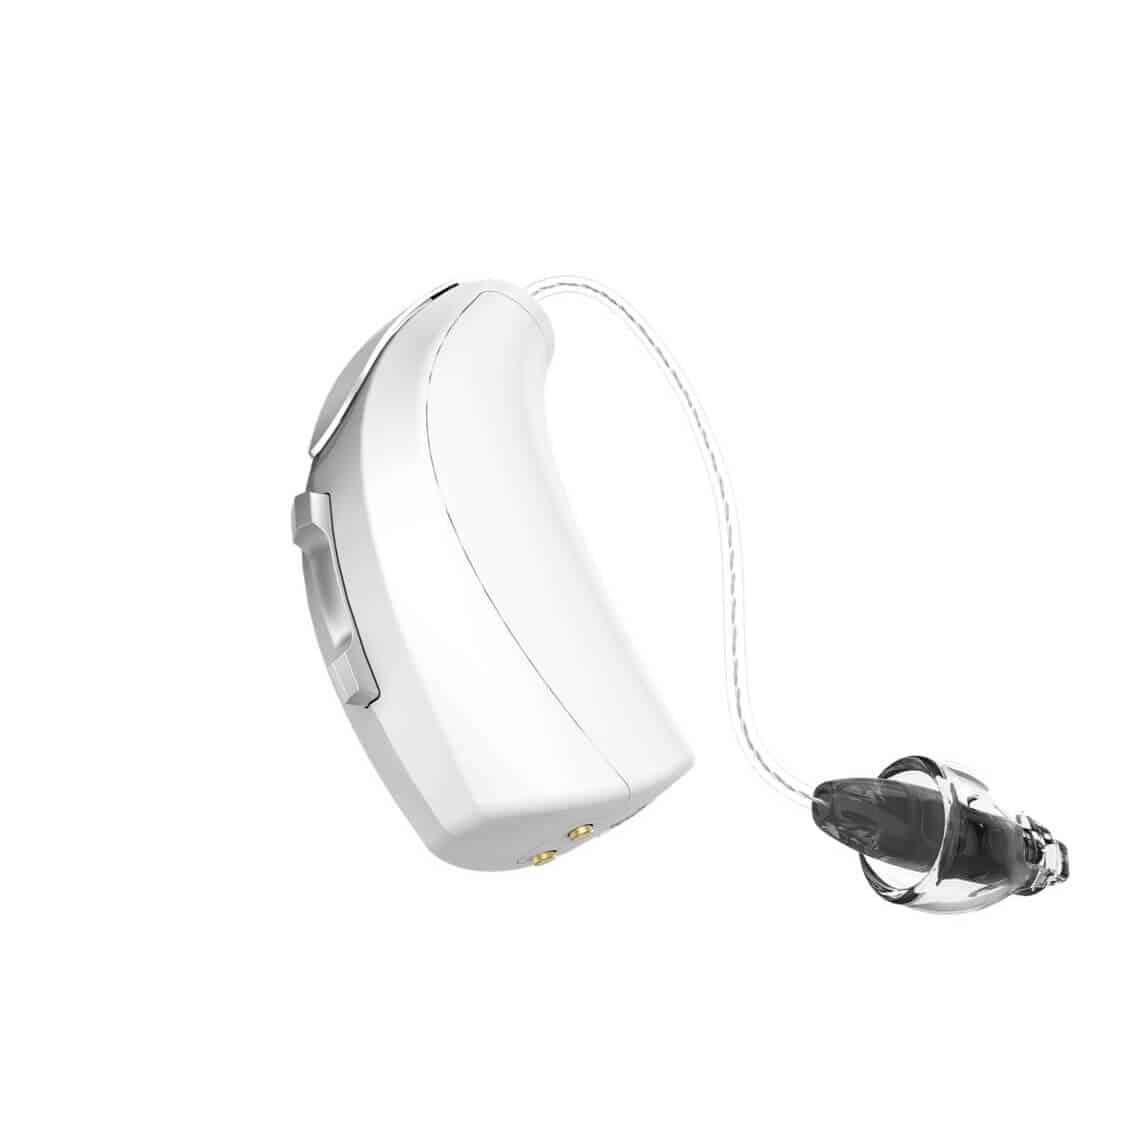 White Hearing Aid Device